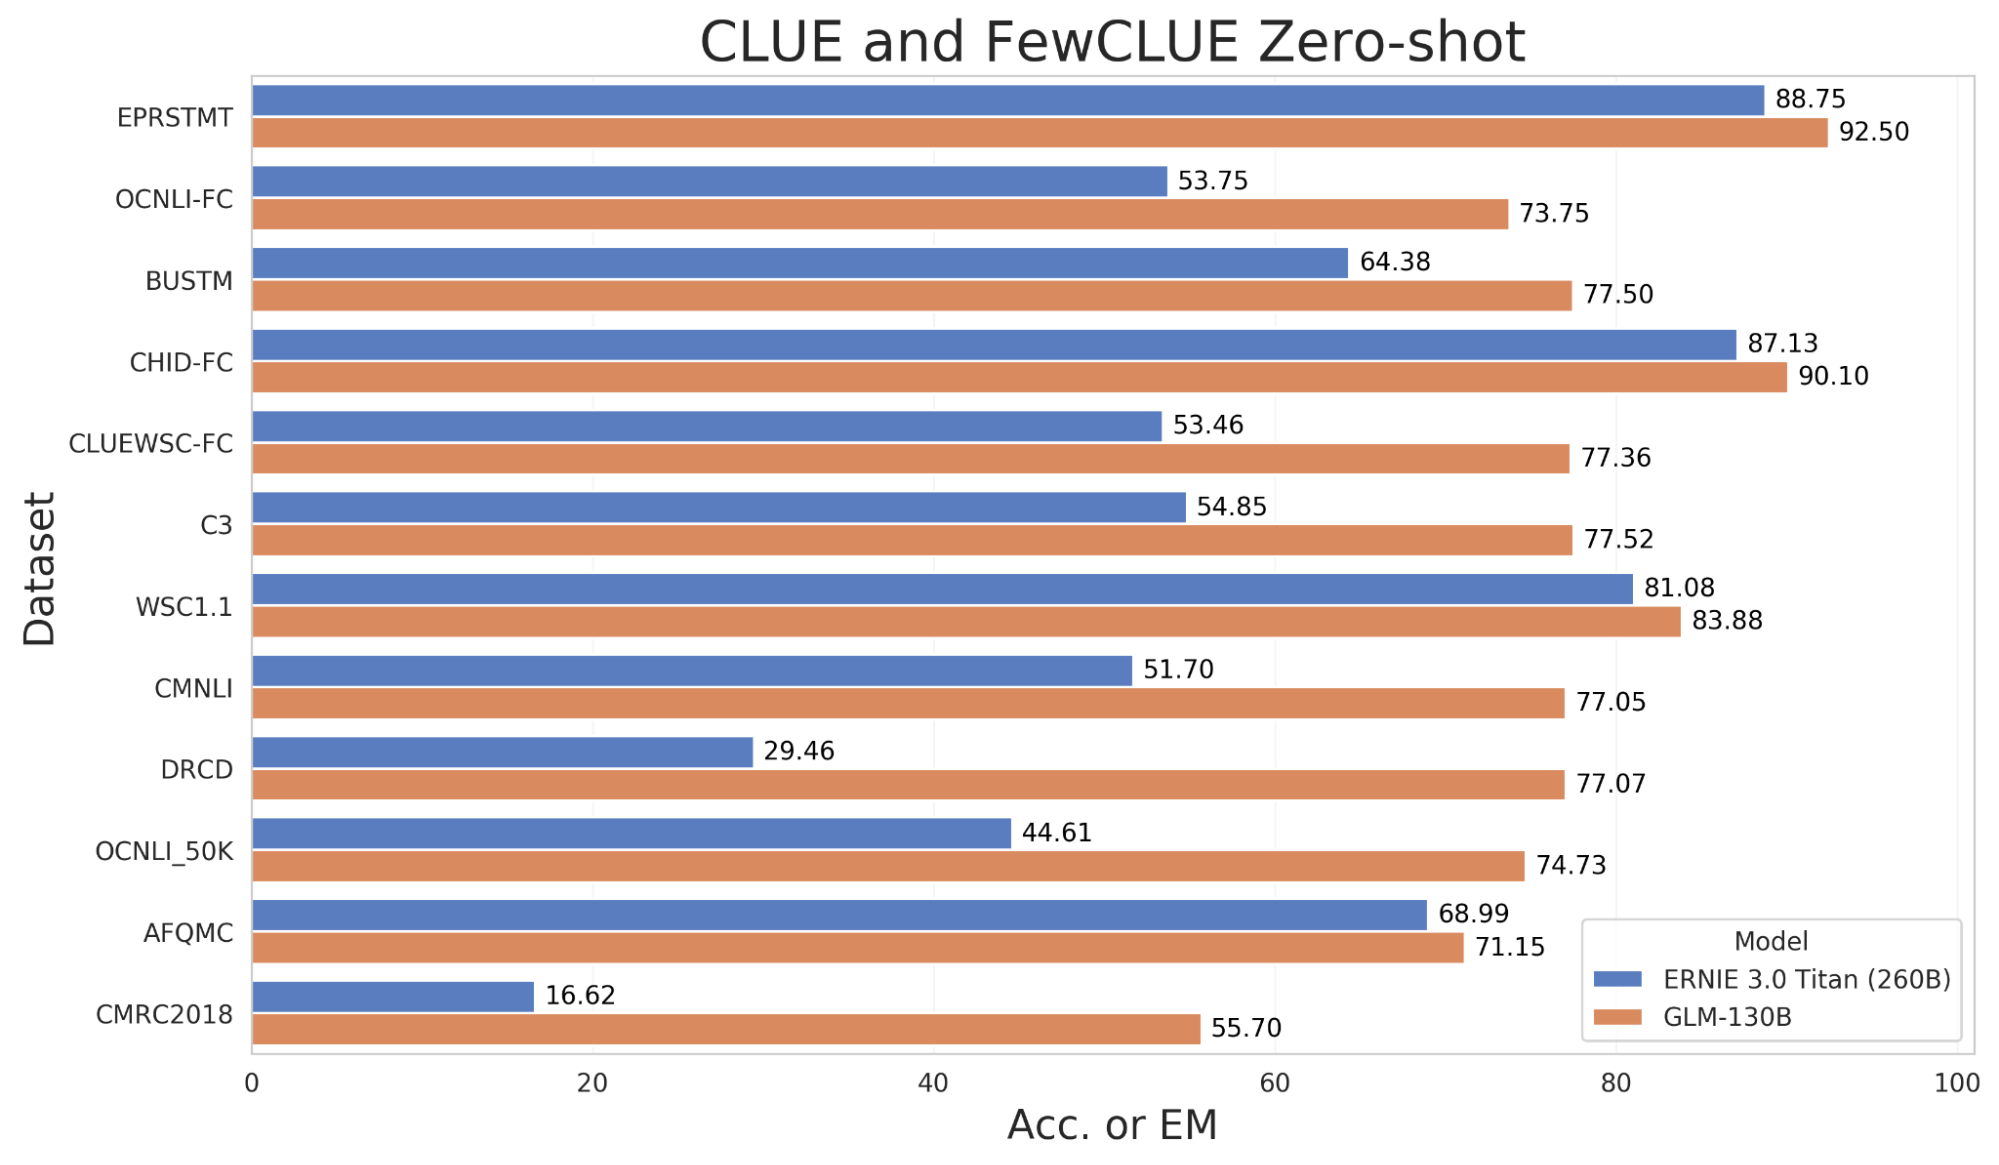 Figure 3. Zero-shot performance on part of CLUE and FewCLUE benchmark datasets.